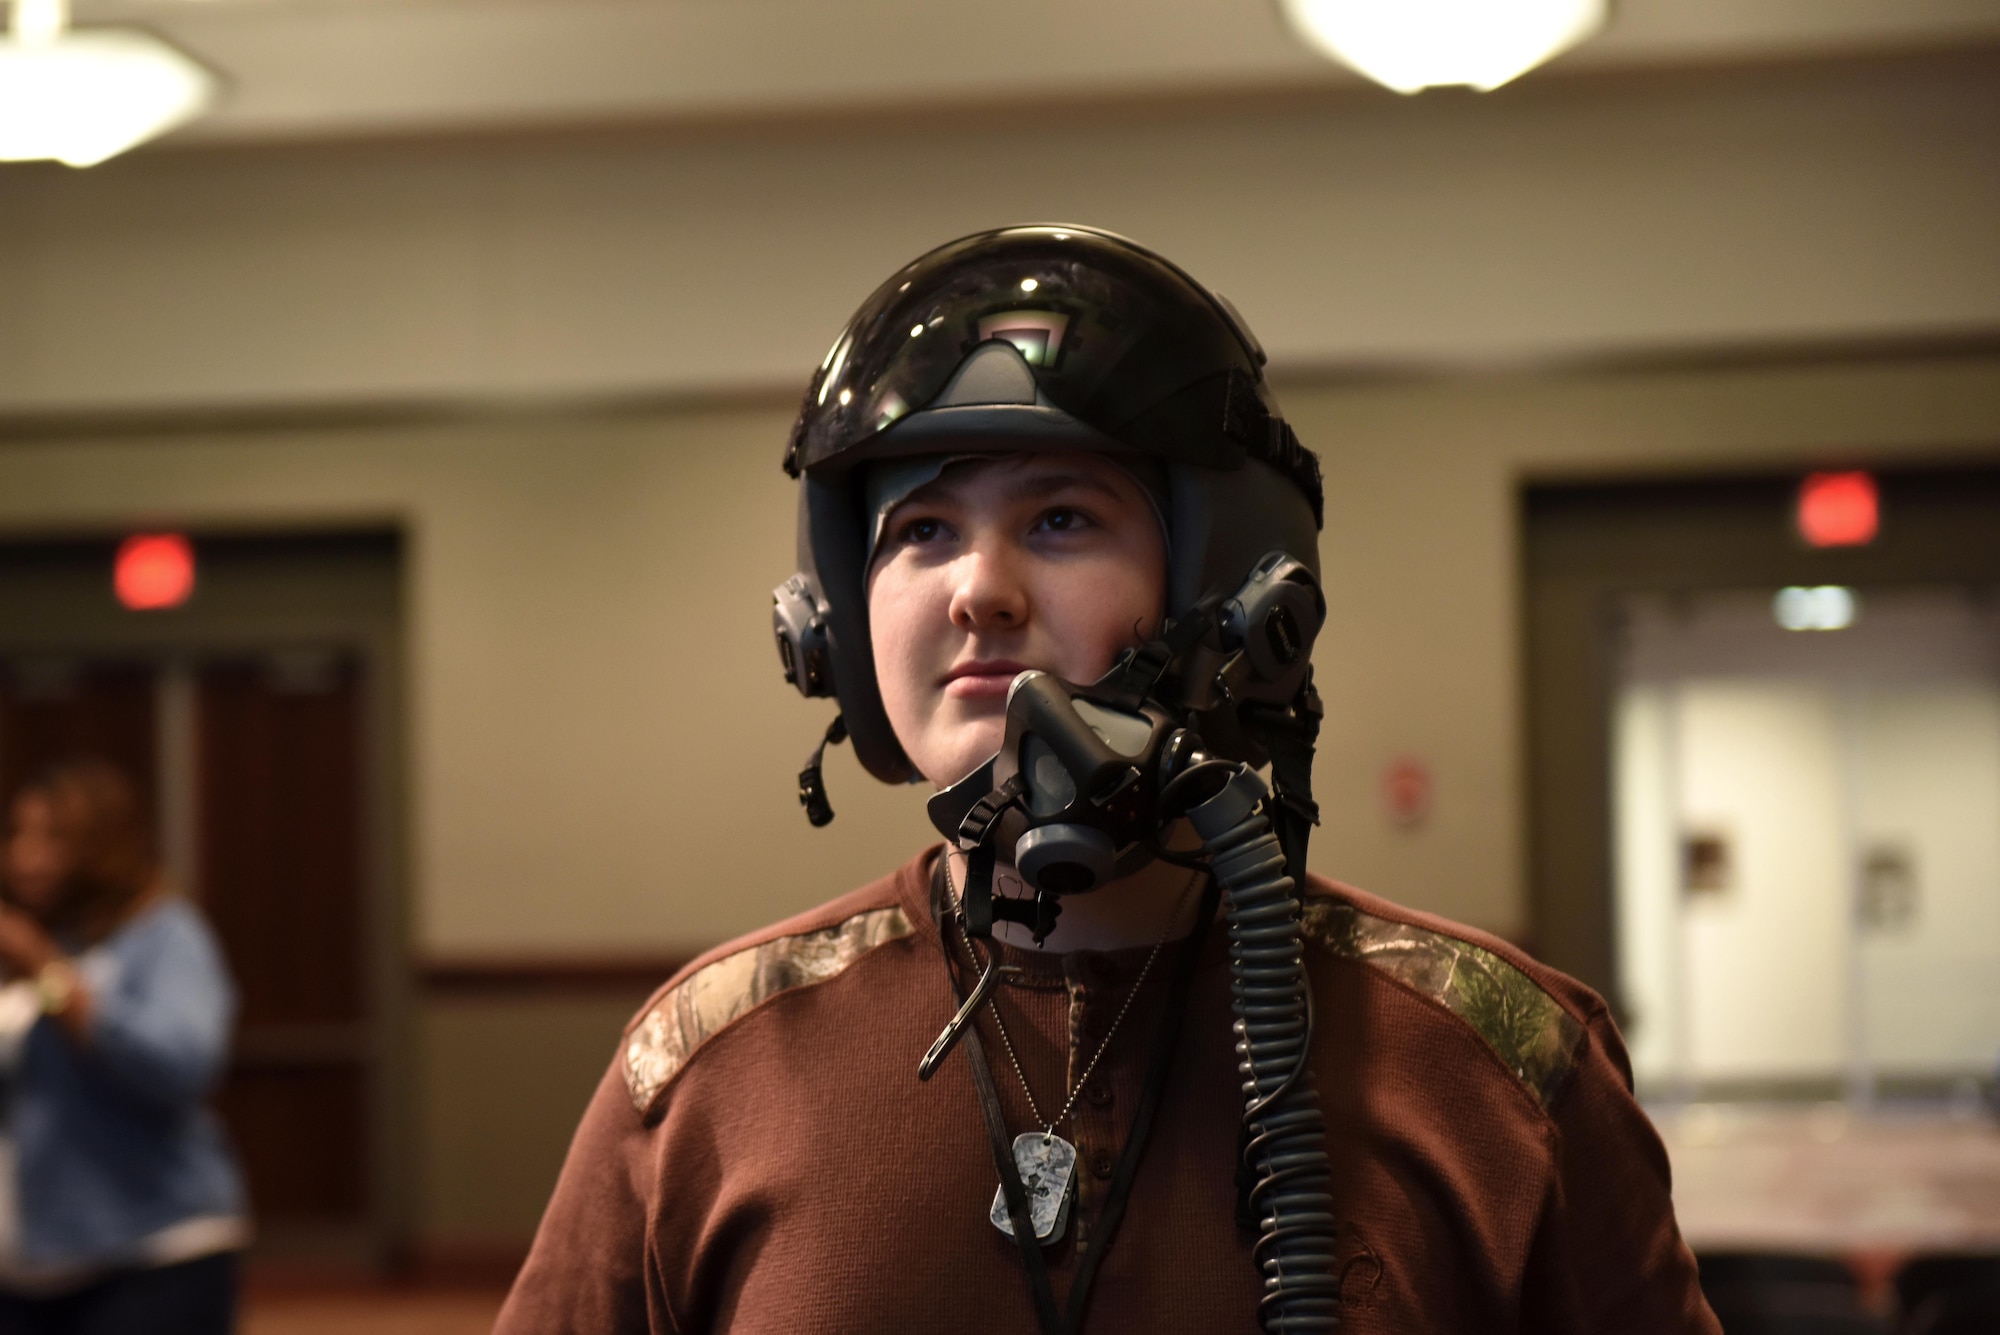 Payne Tomilinson, a Corinth High School student, wears a pilot helmet at Mississippi State University’s Engineering Day March 4, 2019, in Starkville, Mississippi. A three-man team from Columbus Air Force Base connected with over 350 students from Texas, Louisiana, Alabama and Mississippi at the space-